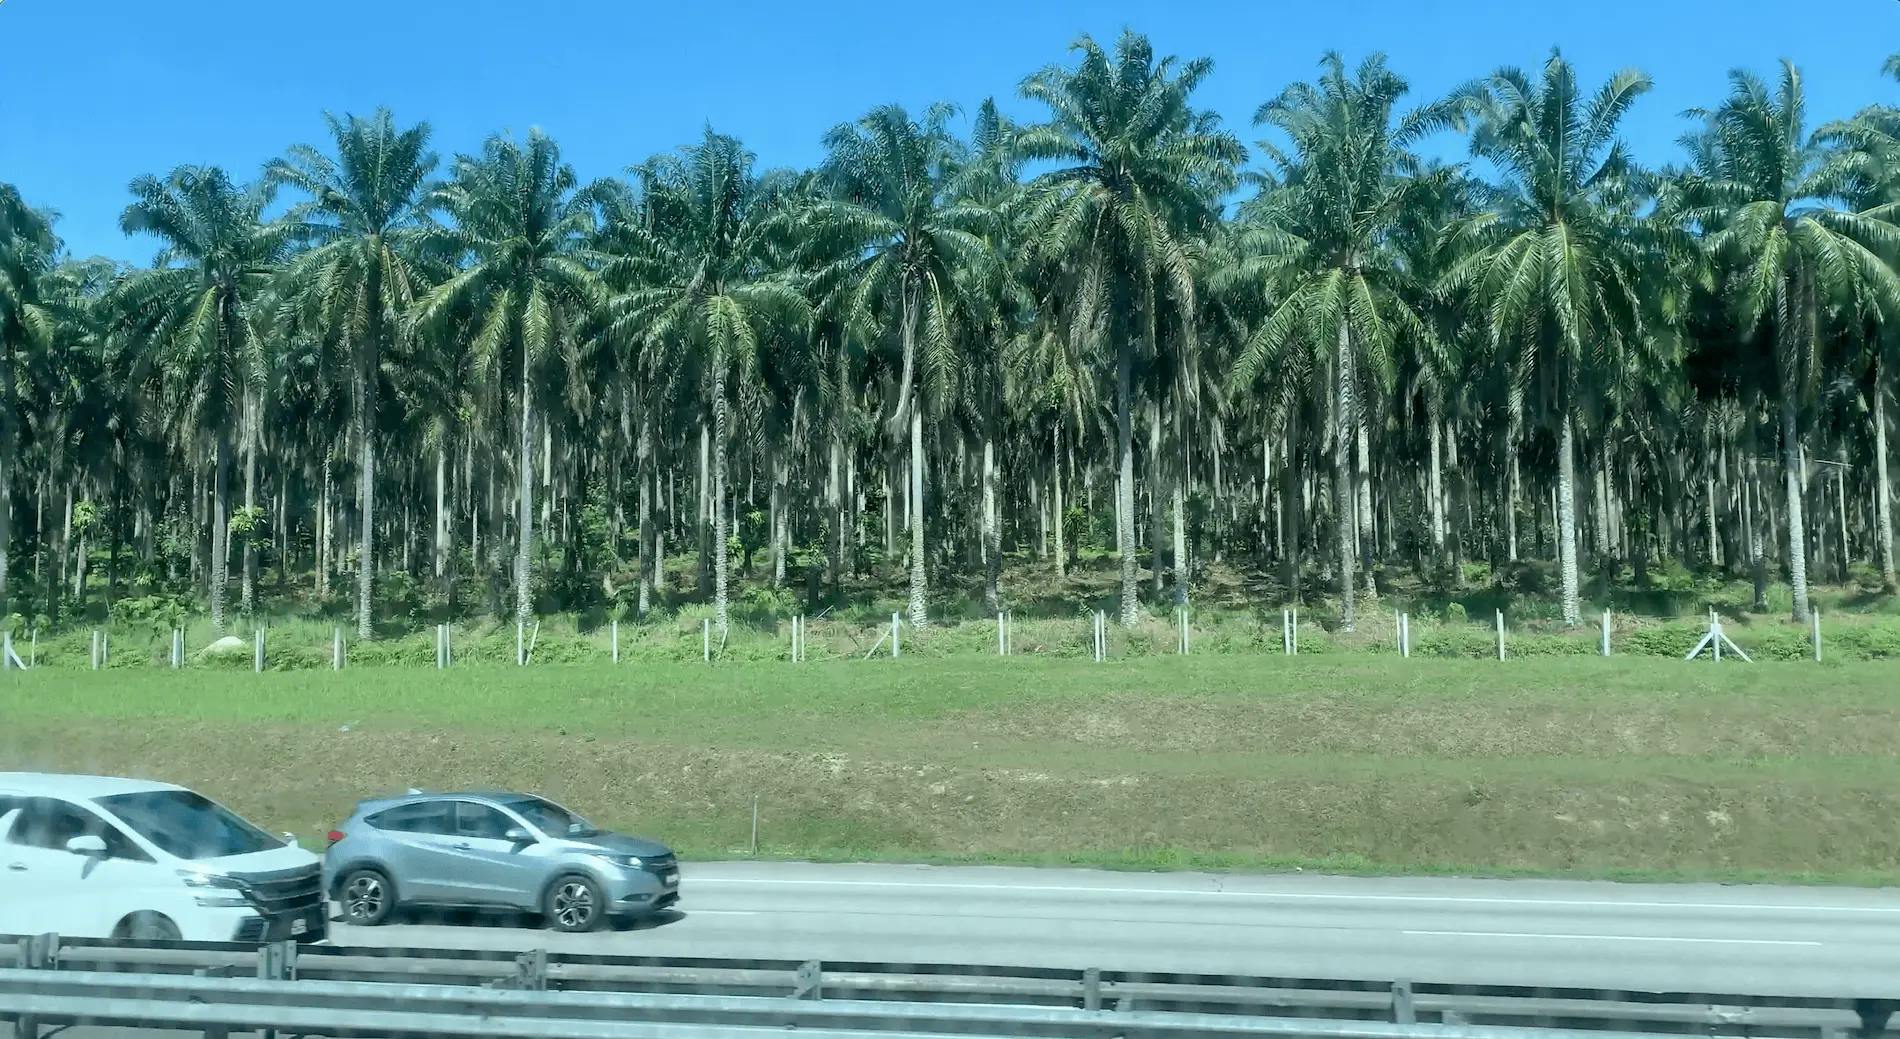 Palm trees on the side of the road with cars passing by